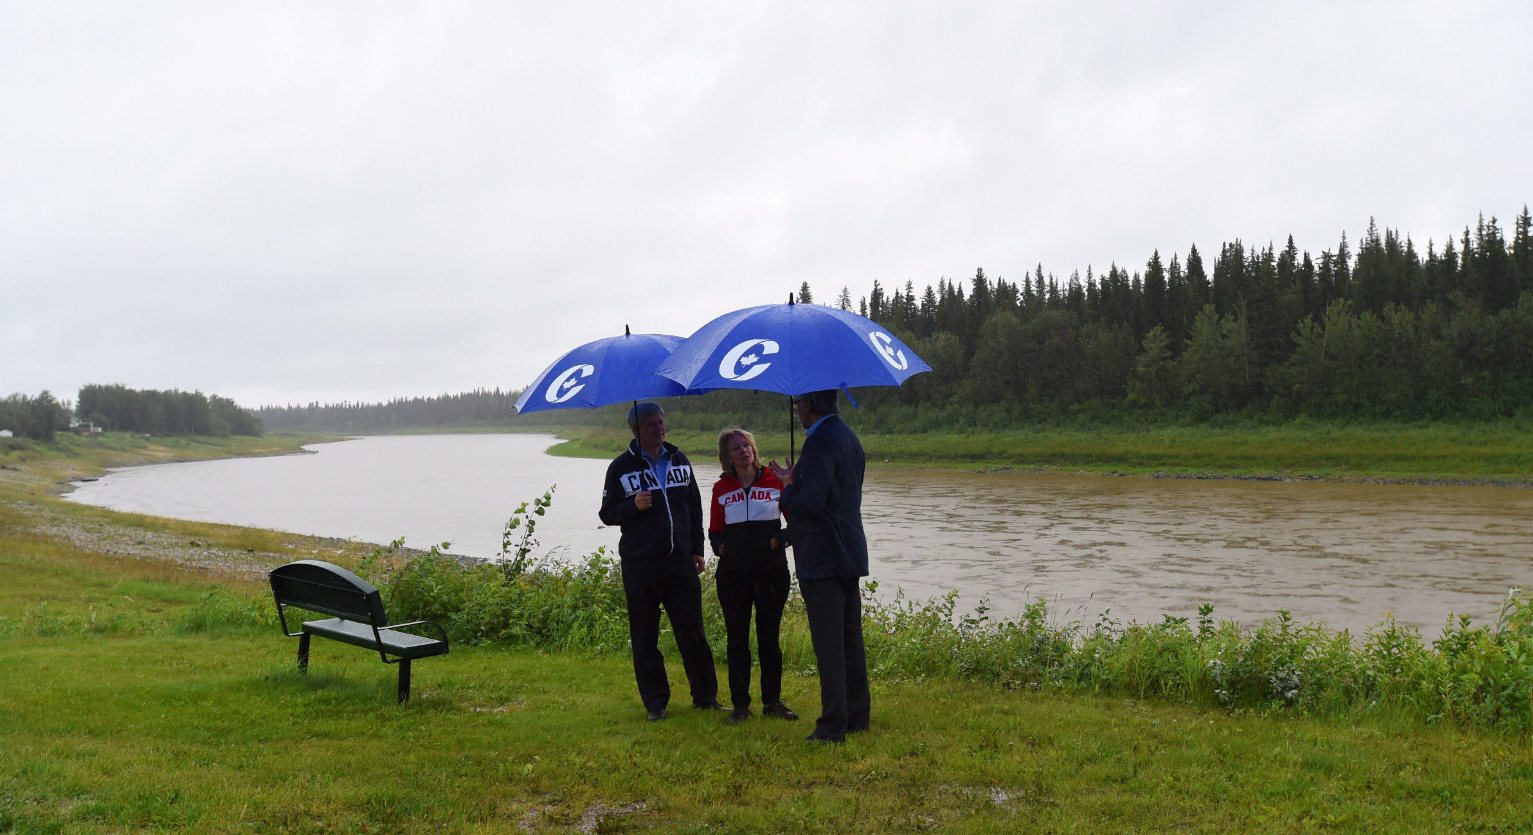 Conservative Leader Stephen Harper, right, and his wife Laureen talk with Conservative candidate for the Northwest Territories Floyd Roland as they visit the banks of the Hay River in Hay River, Northwest Territories, on Friday, August 14, 2015. (Sean Kilpatrick/The Canadian Press)